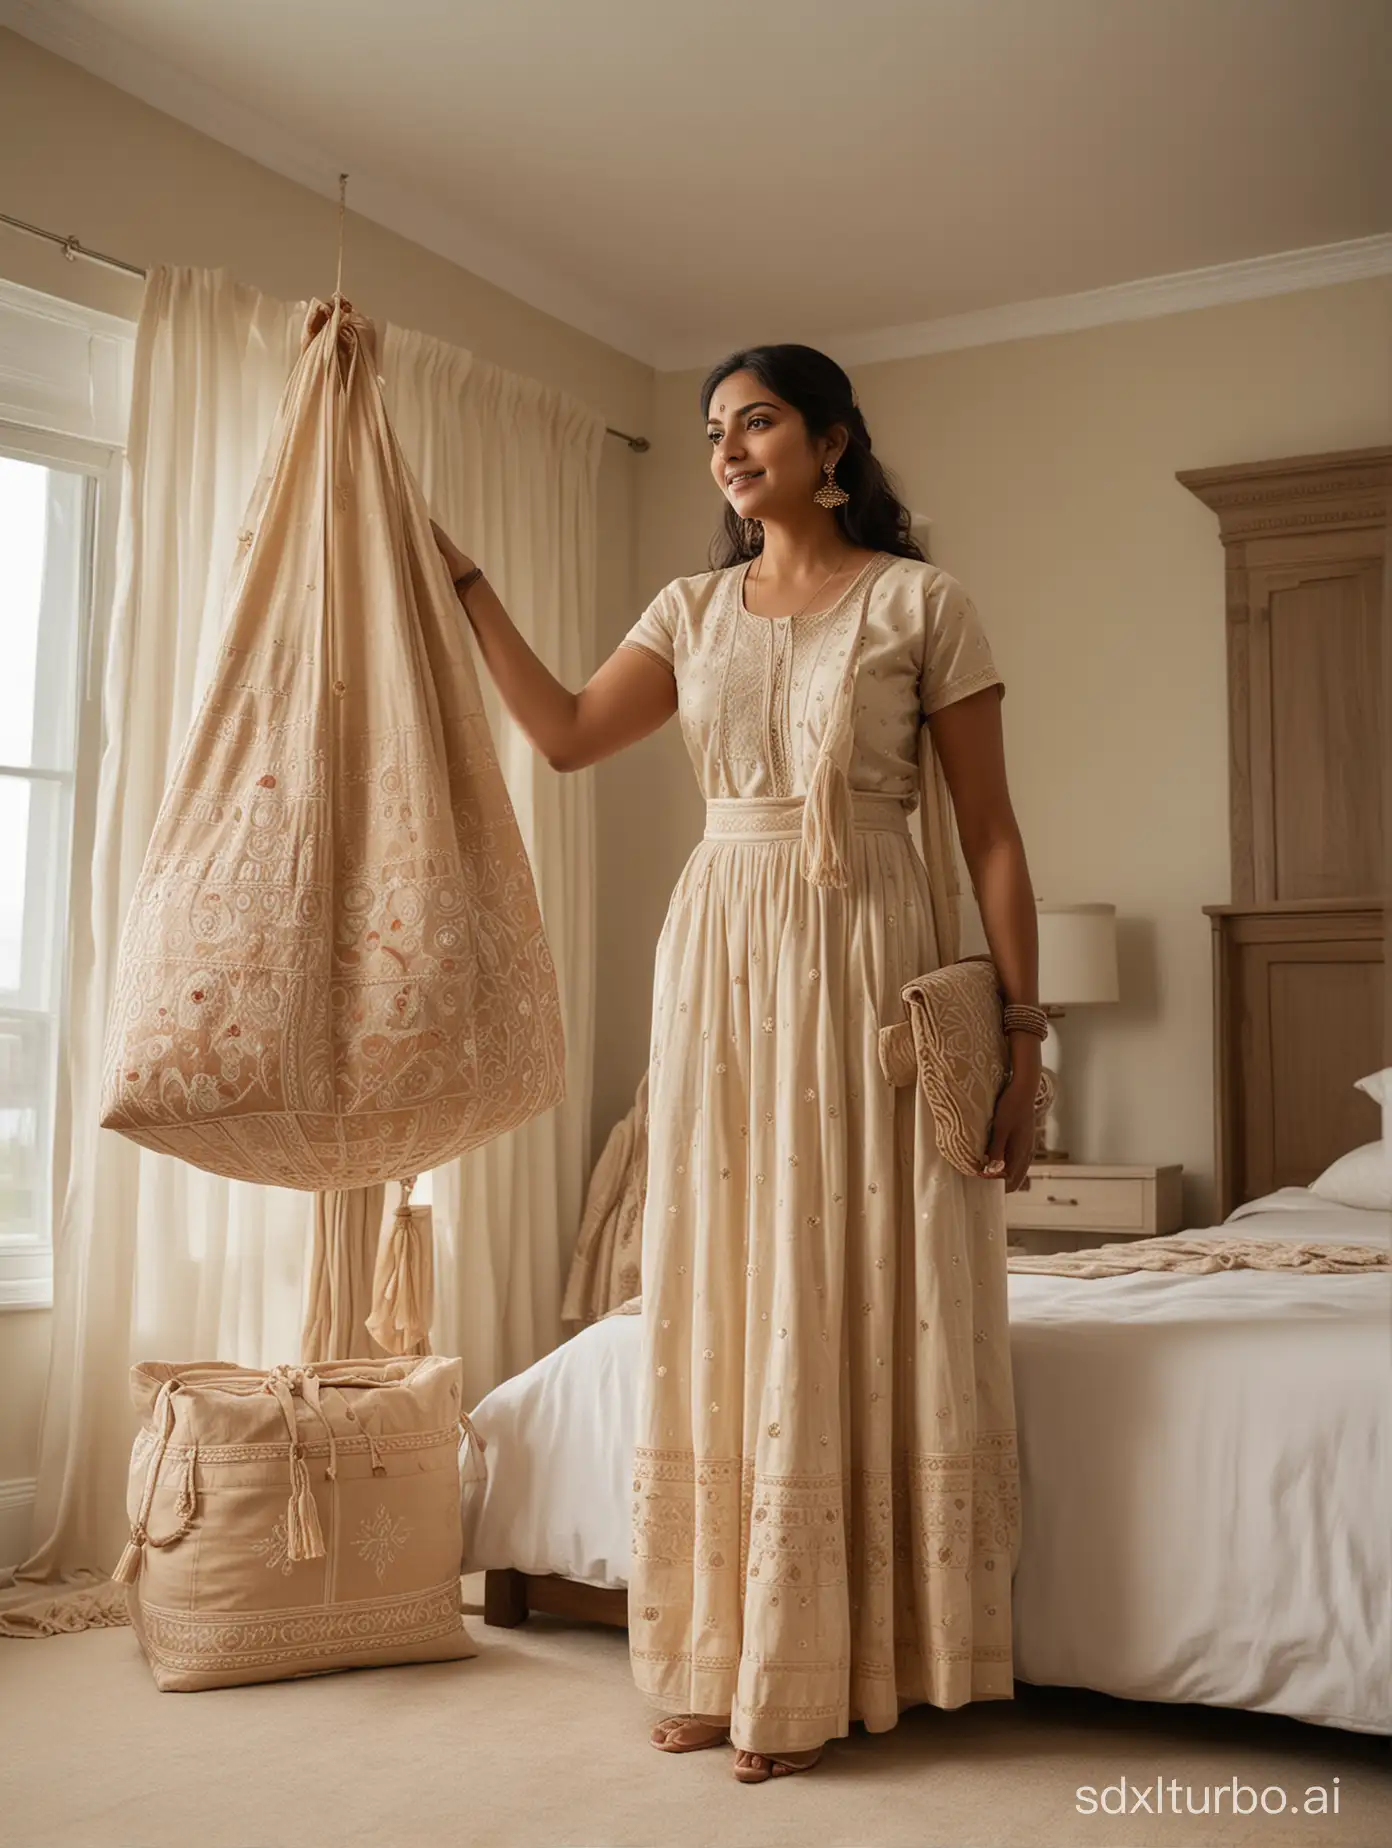 Indian-Woman-in-Traditional-Partywear-with-Hayden-Hill-Storage-Bag-in-Brightly-Lit-Bedroom